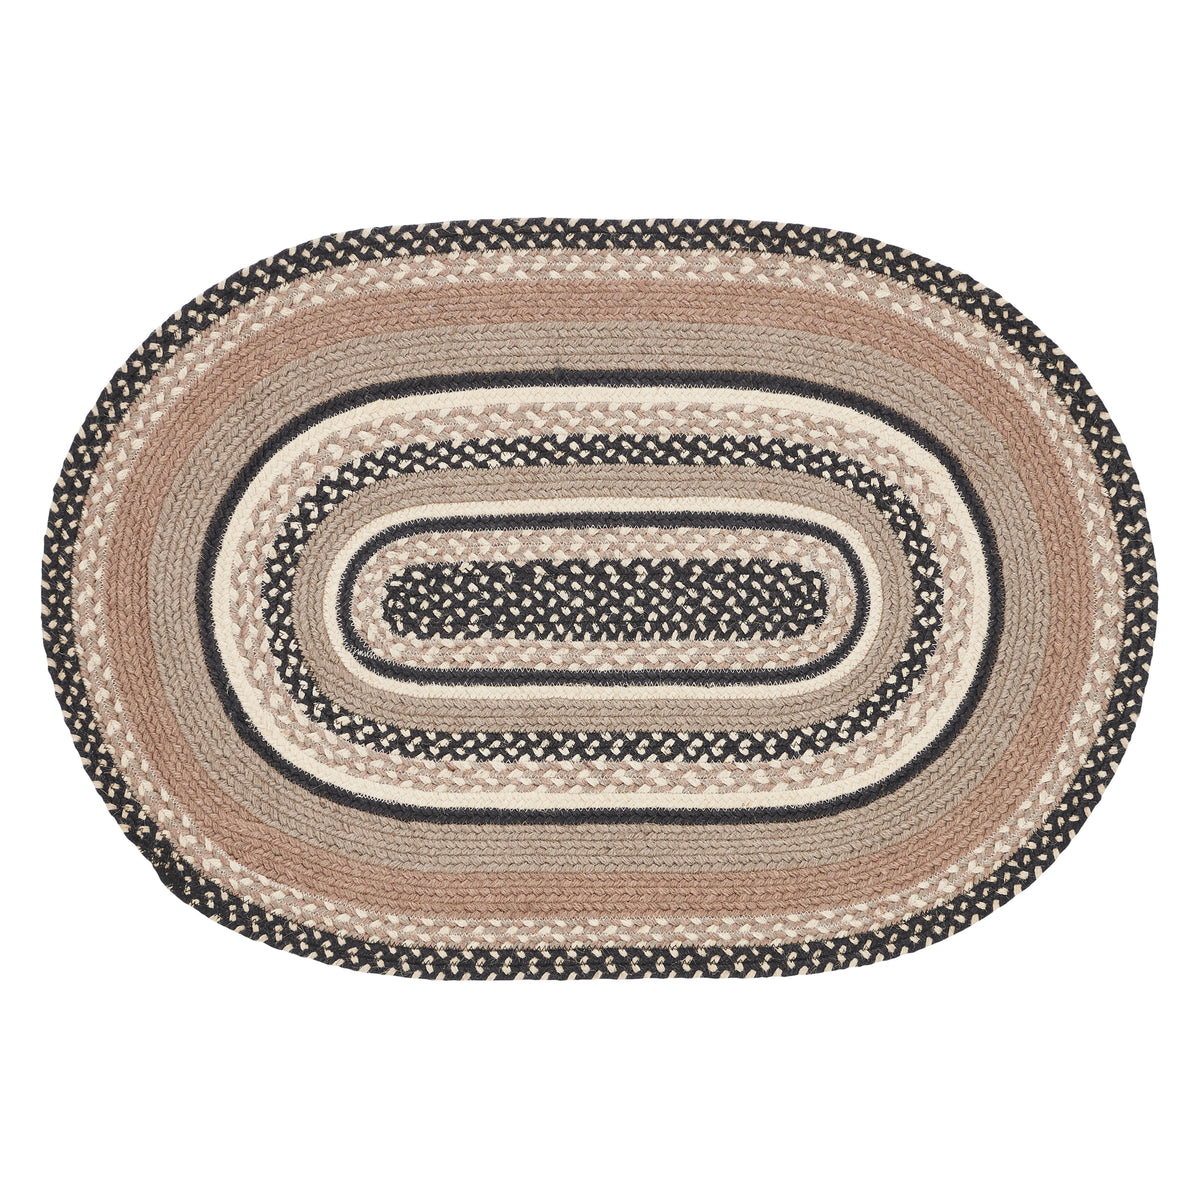 April & Olive Sawyer Mill Charcoal Creme Jute Rug Oval w/ Pad 24x36 By VHC Brands